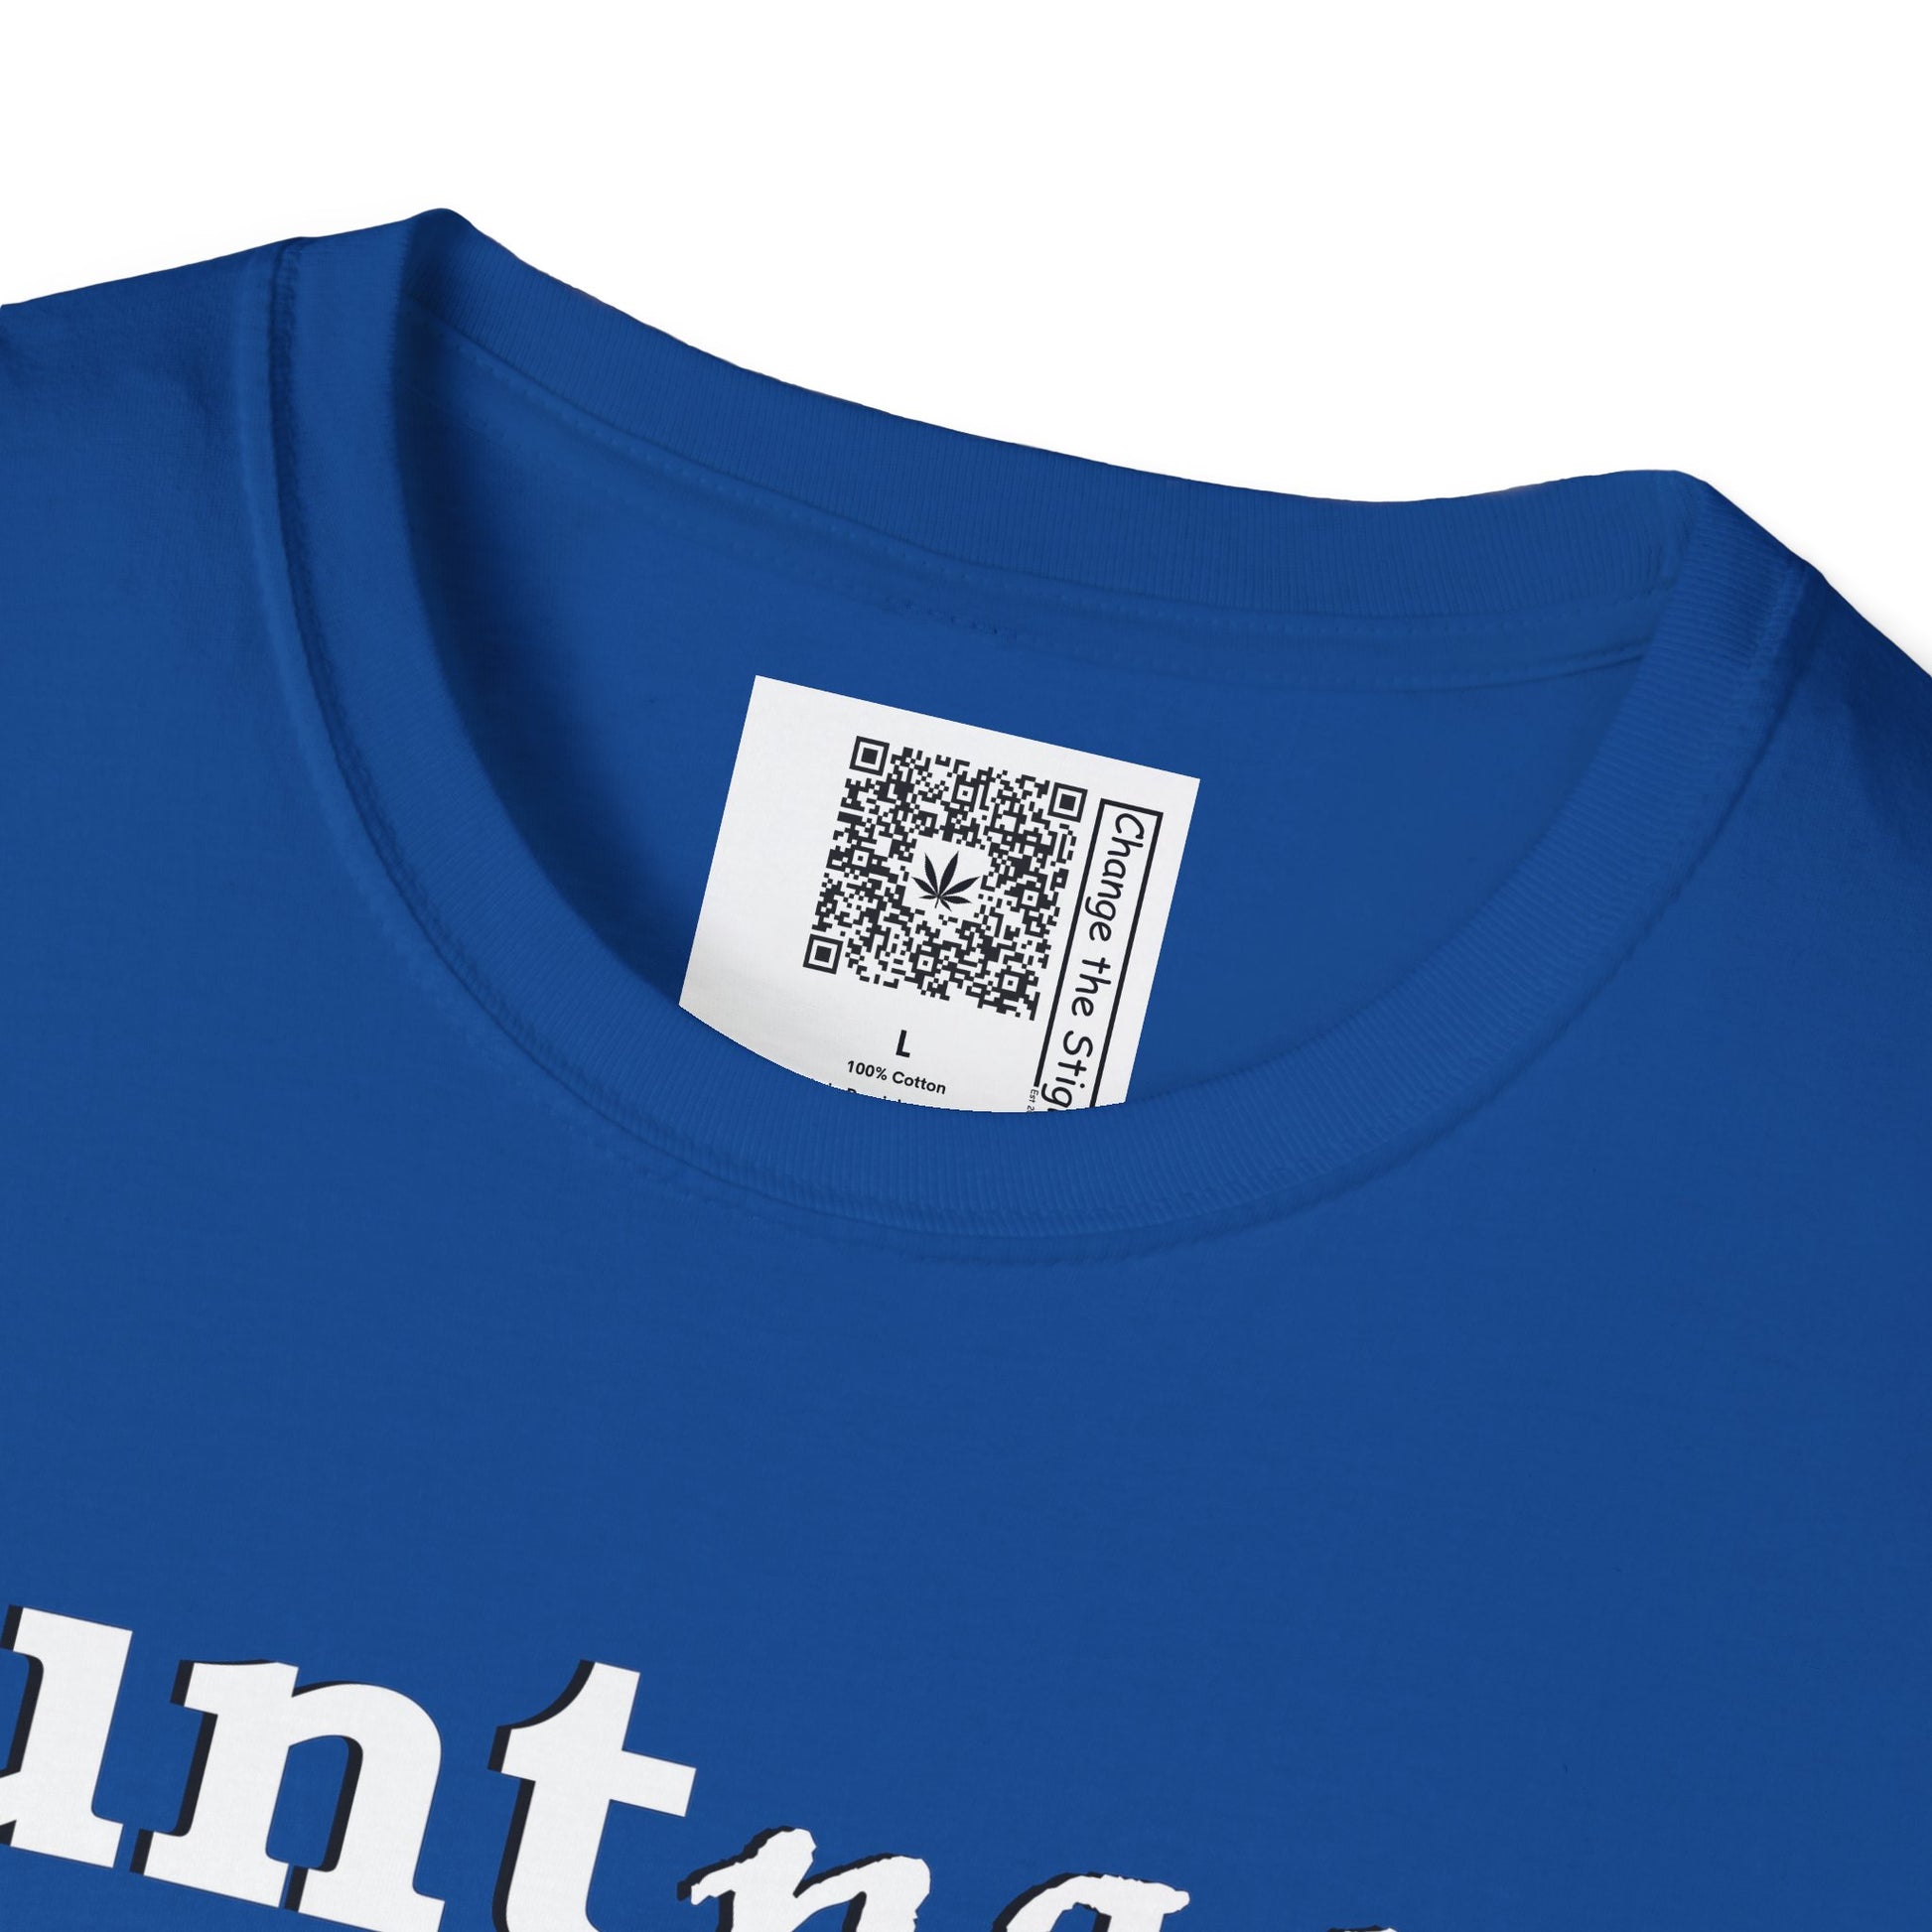 Change the Stigma, Royal color, shirt saying "blunt passer", Shirt is open displayed, Qr code is shown neck tag